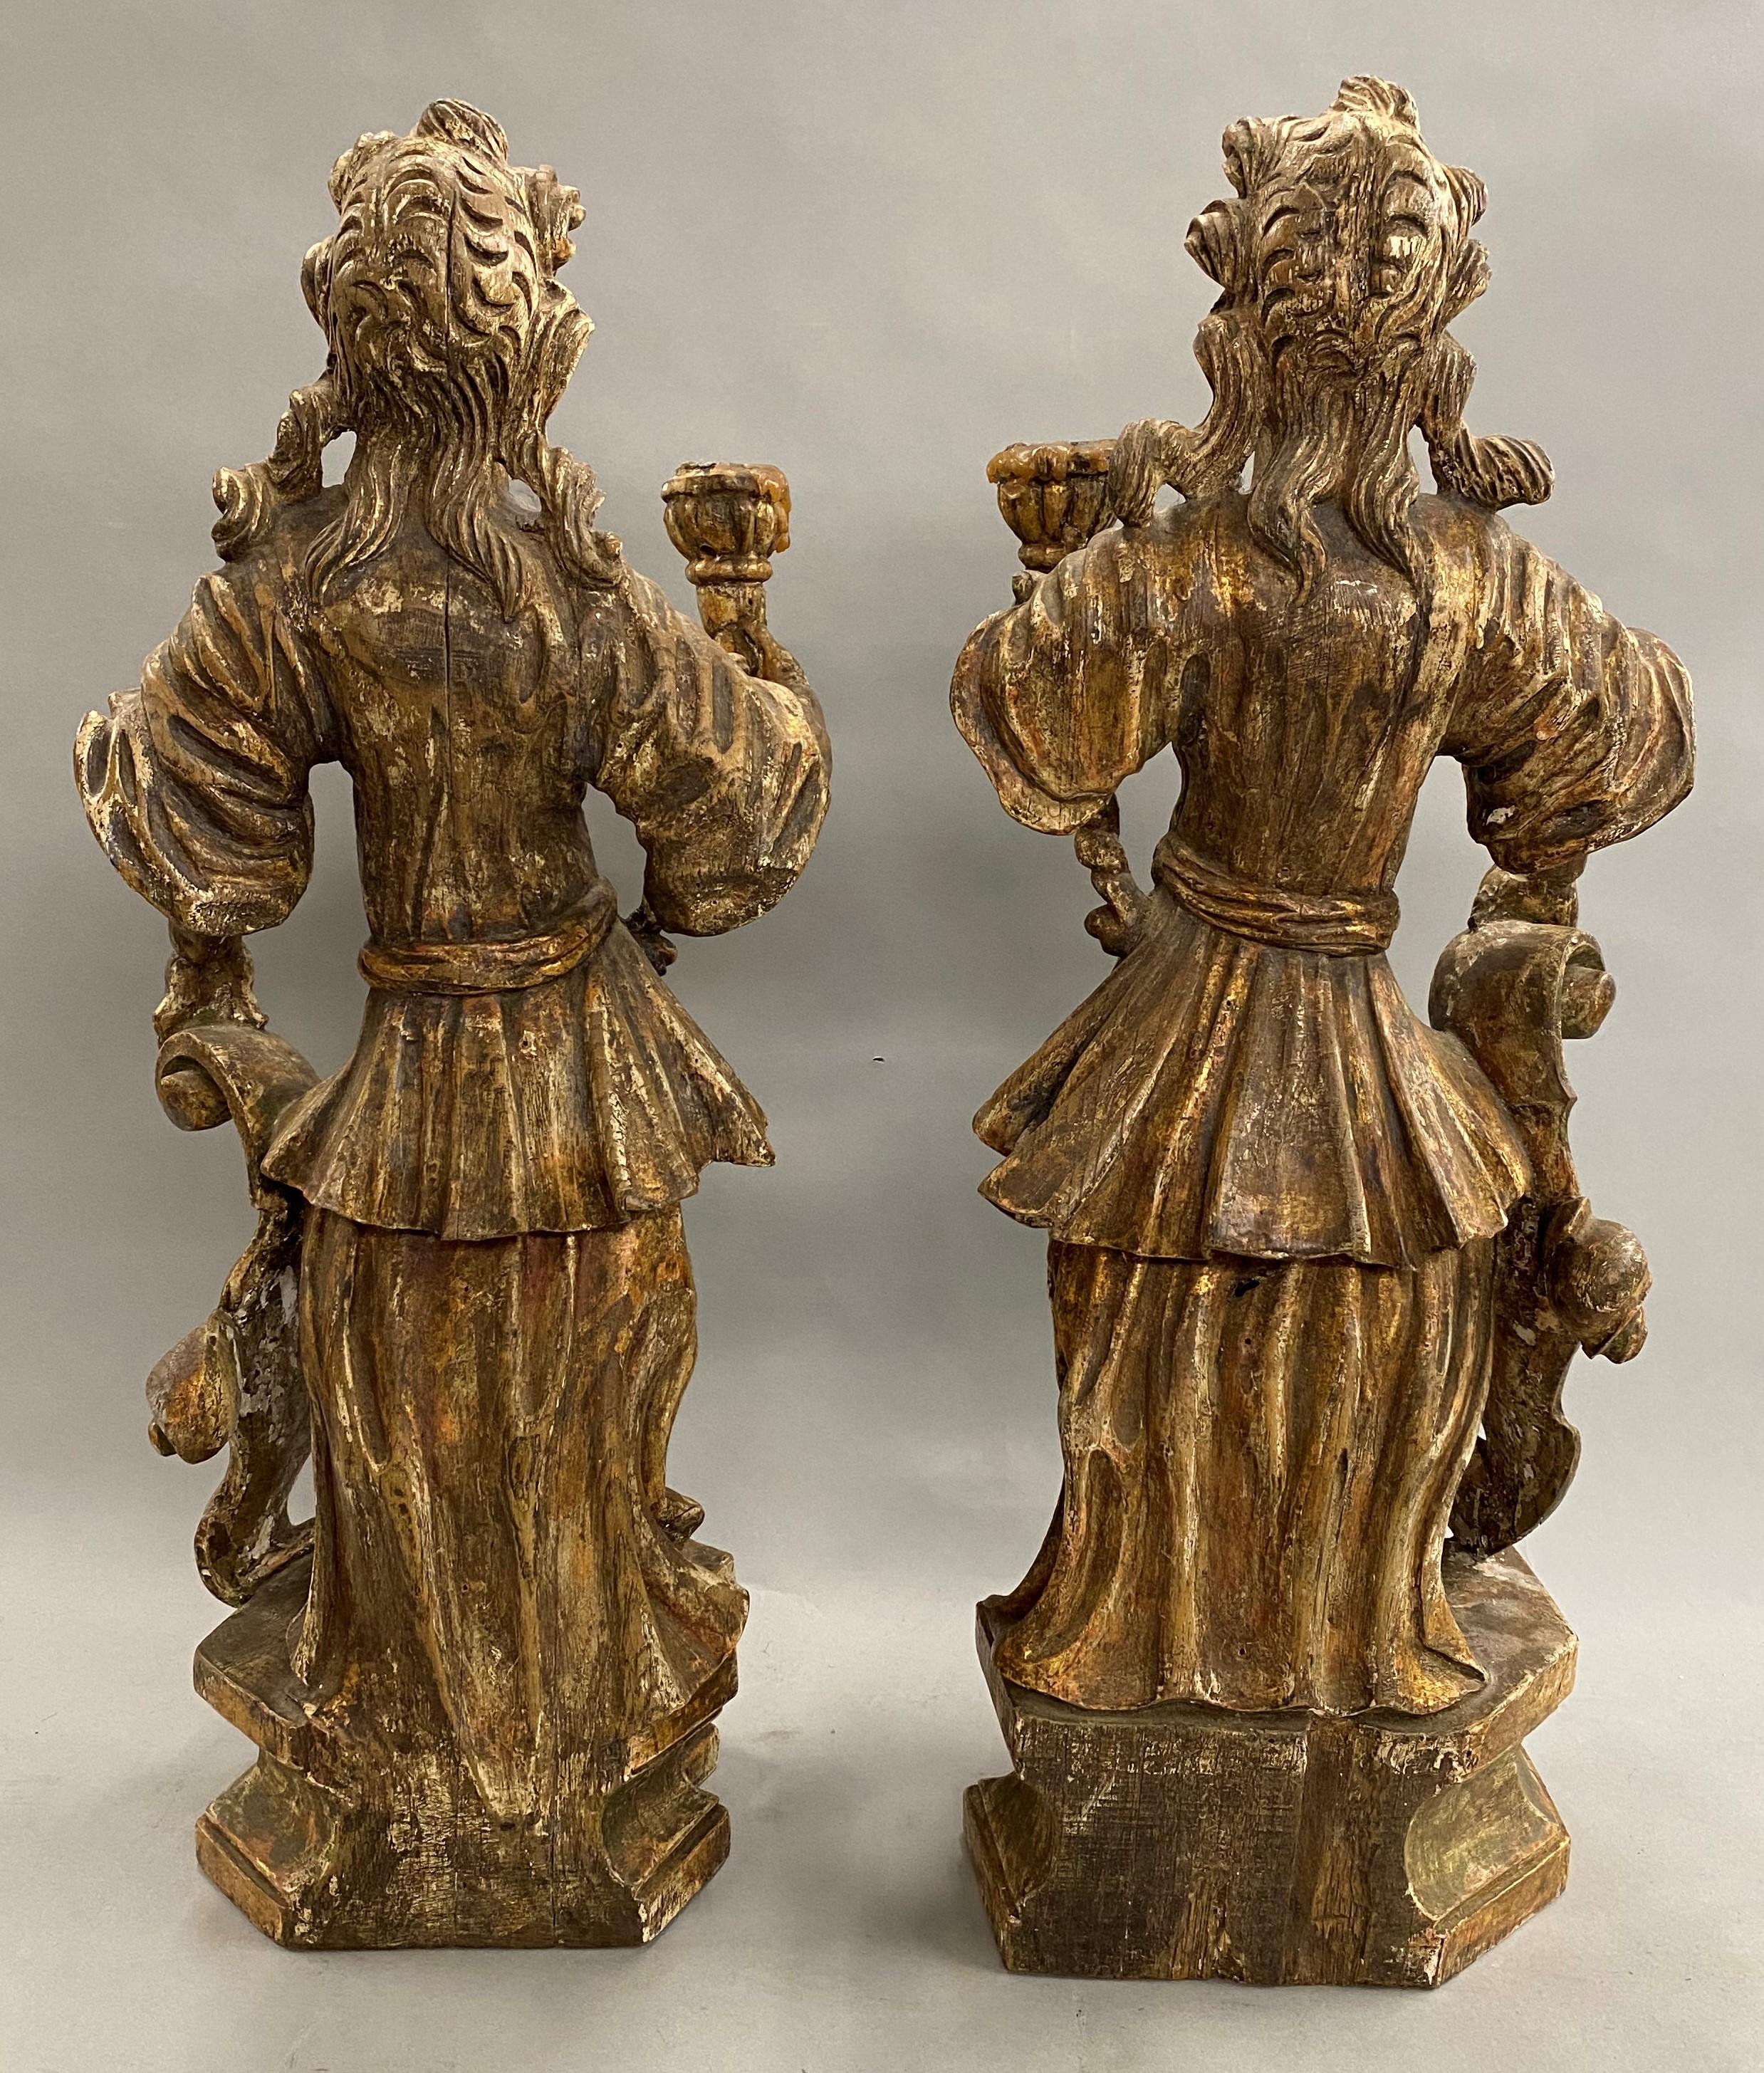 Hand-Carved Pair of 18th Century Continental Figural Carved Polychrome & Gilt Candle Holders For Sale